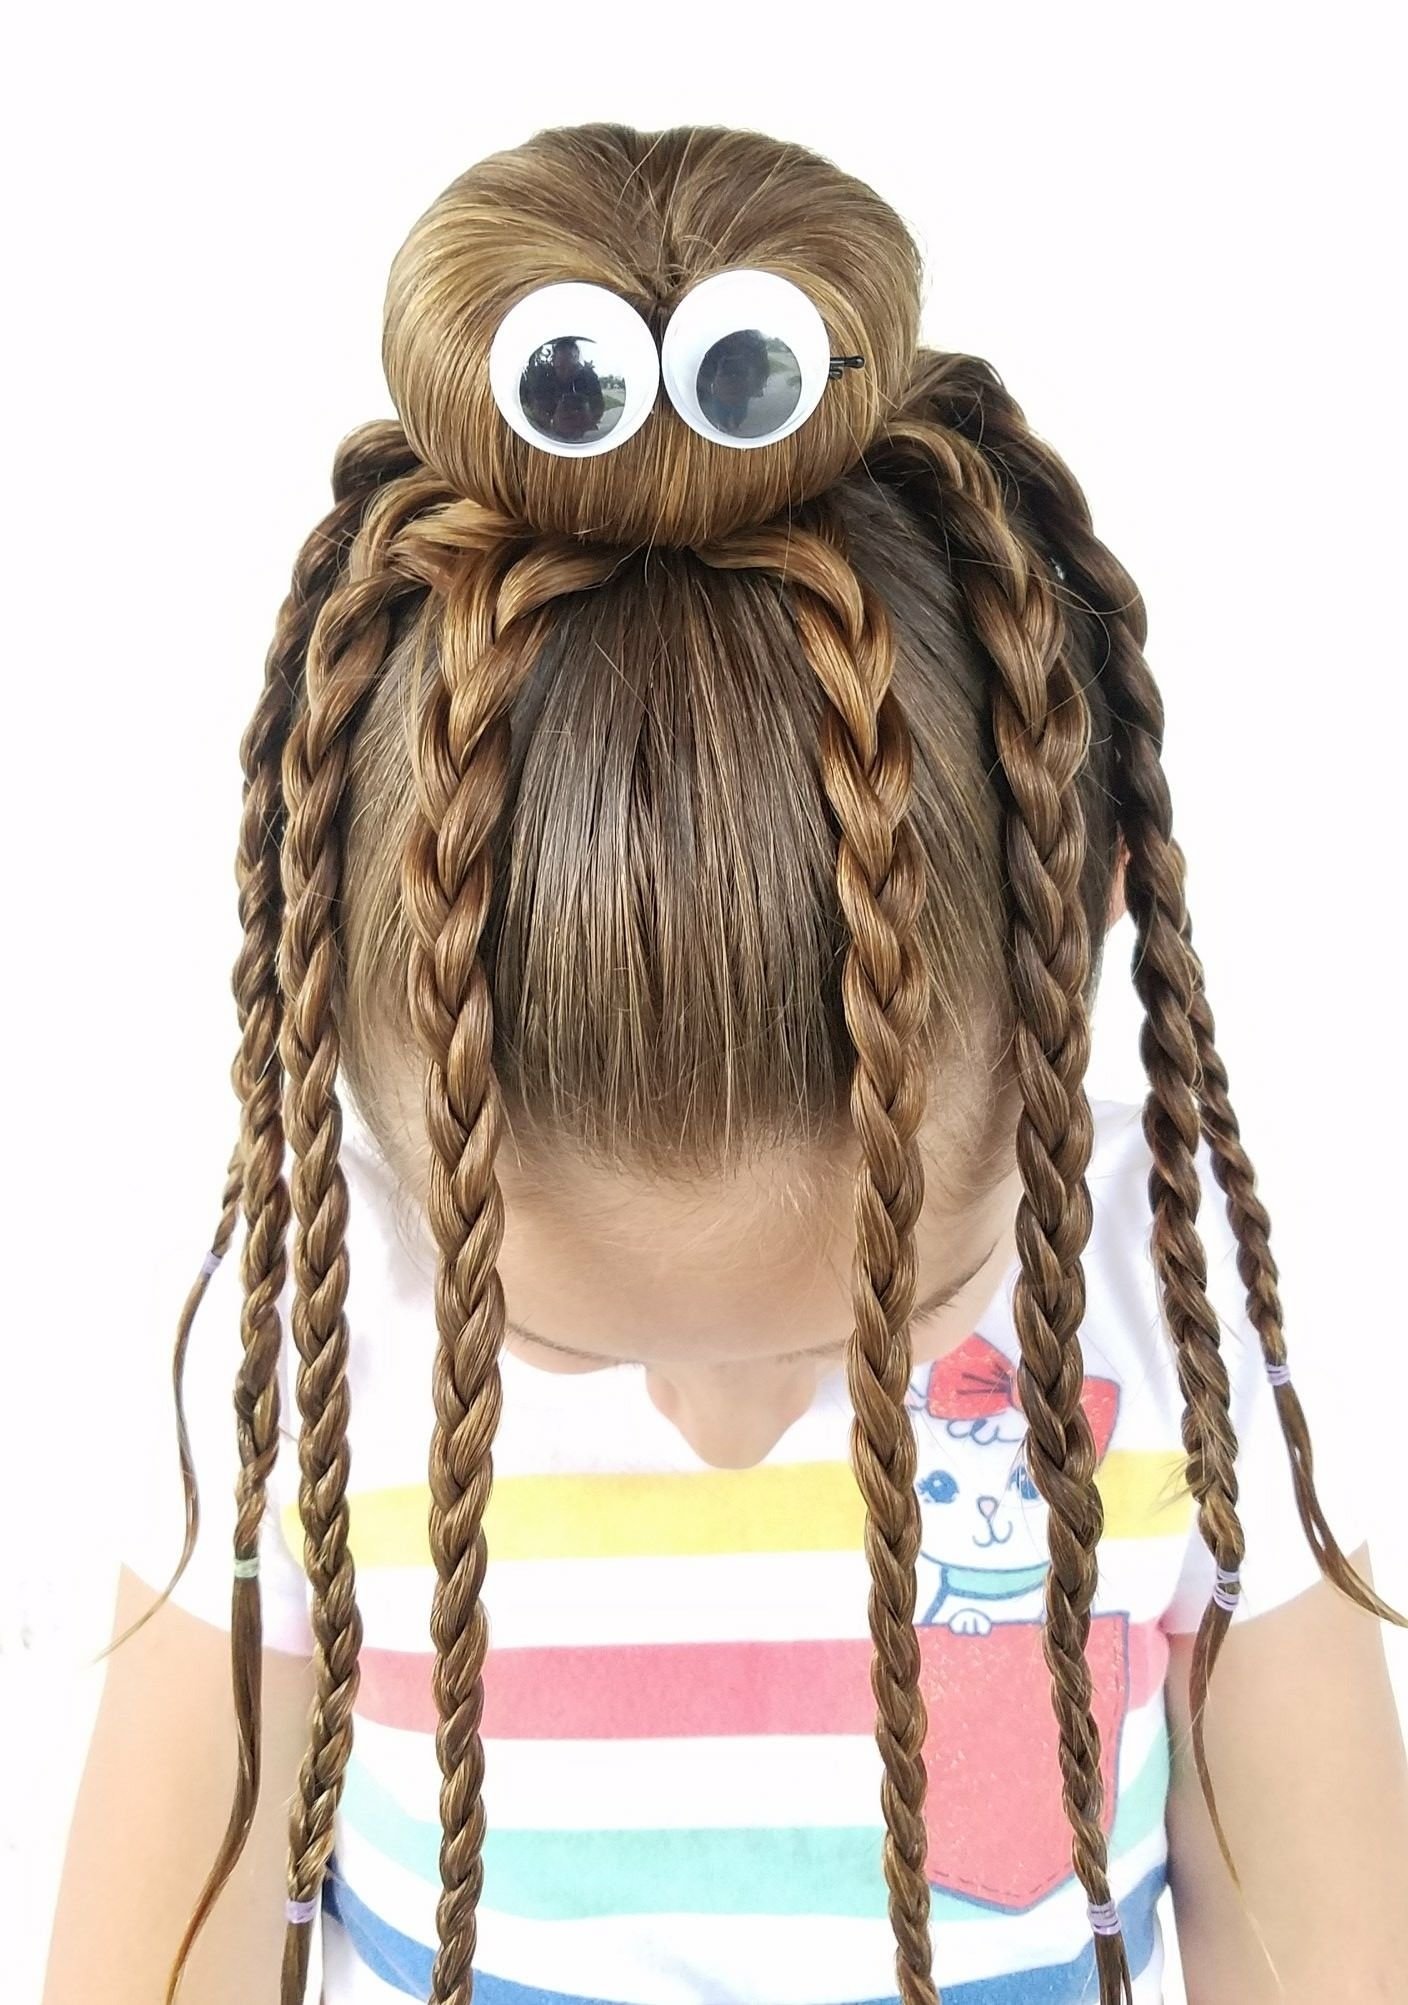 10 Elegant Crazy Hair Ideas For Long Hair we had fun creating this octopus bun hairstyle with my daughter 2022